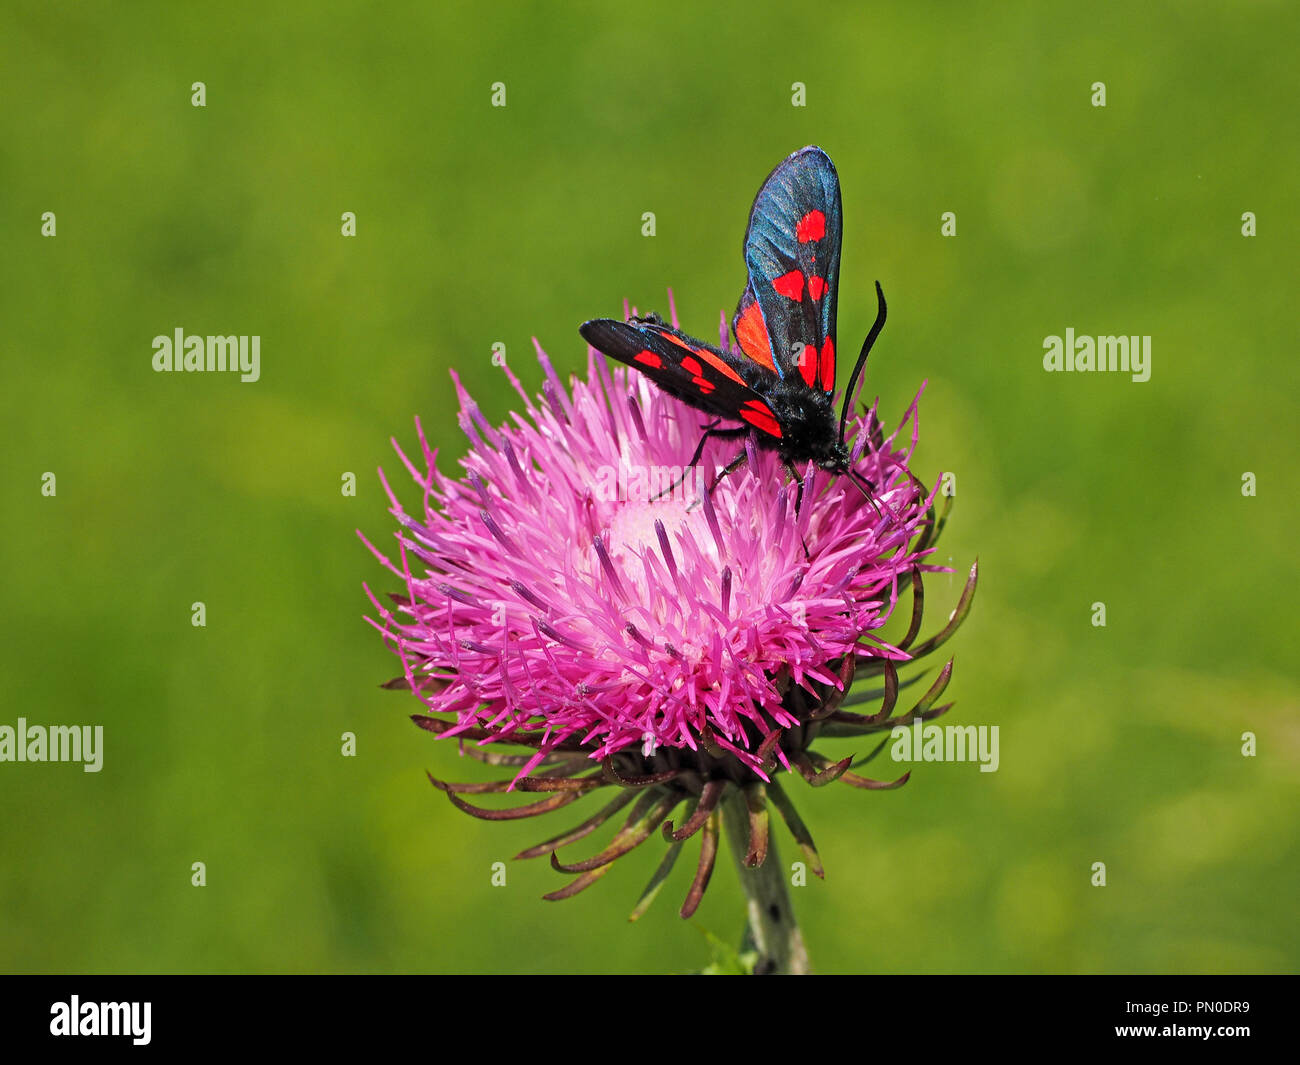 dazzling Five-Spot Burnet Moth (Zygaena trifolii) feeding on purple flowerhead of Welted Thistle (Carduus crispus), in the Ariege Pyrenees of France Stock Photo